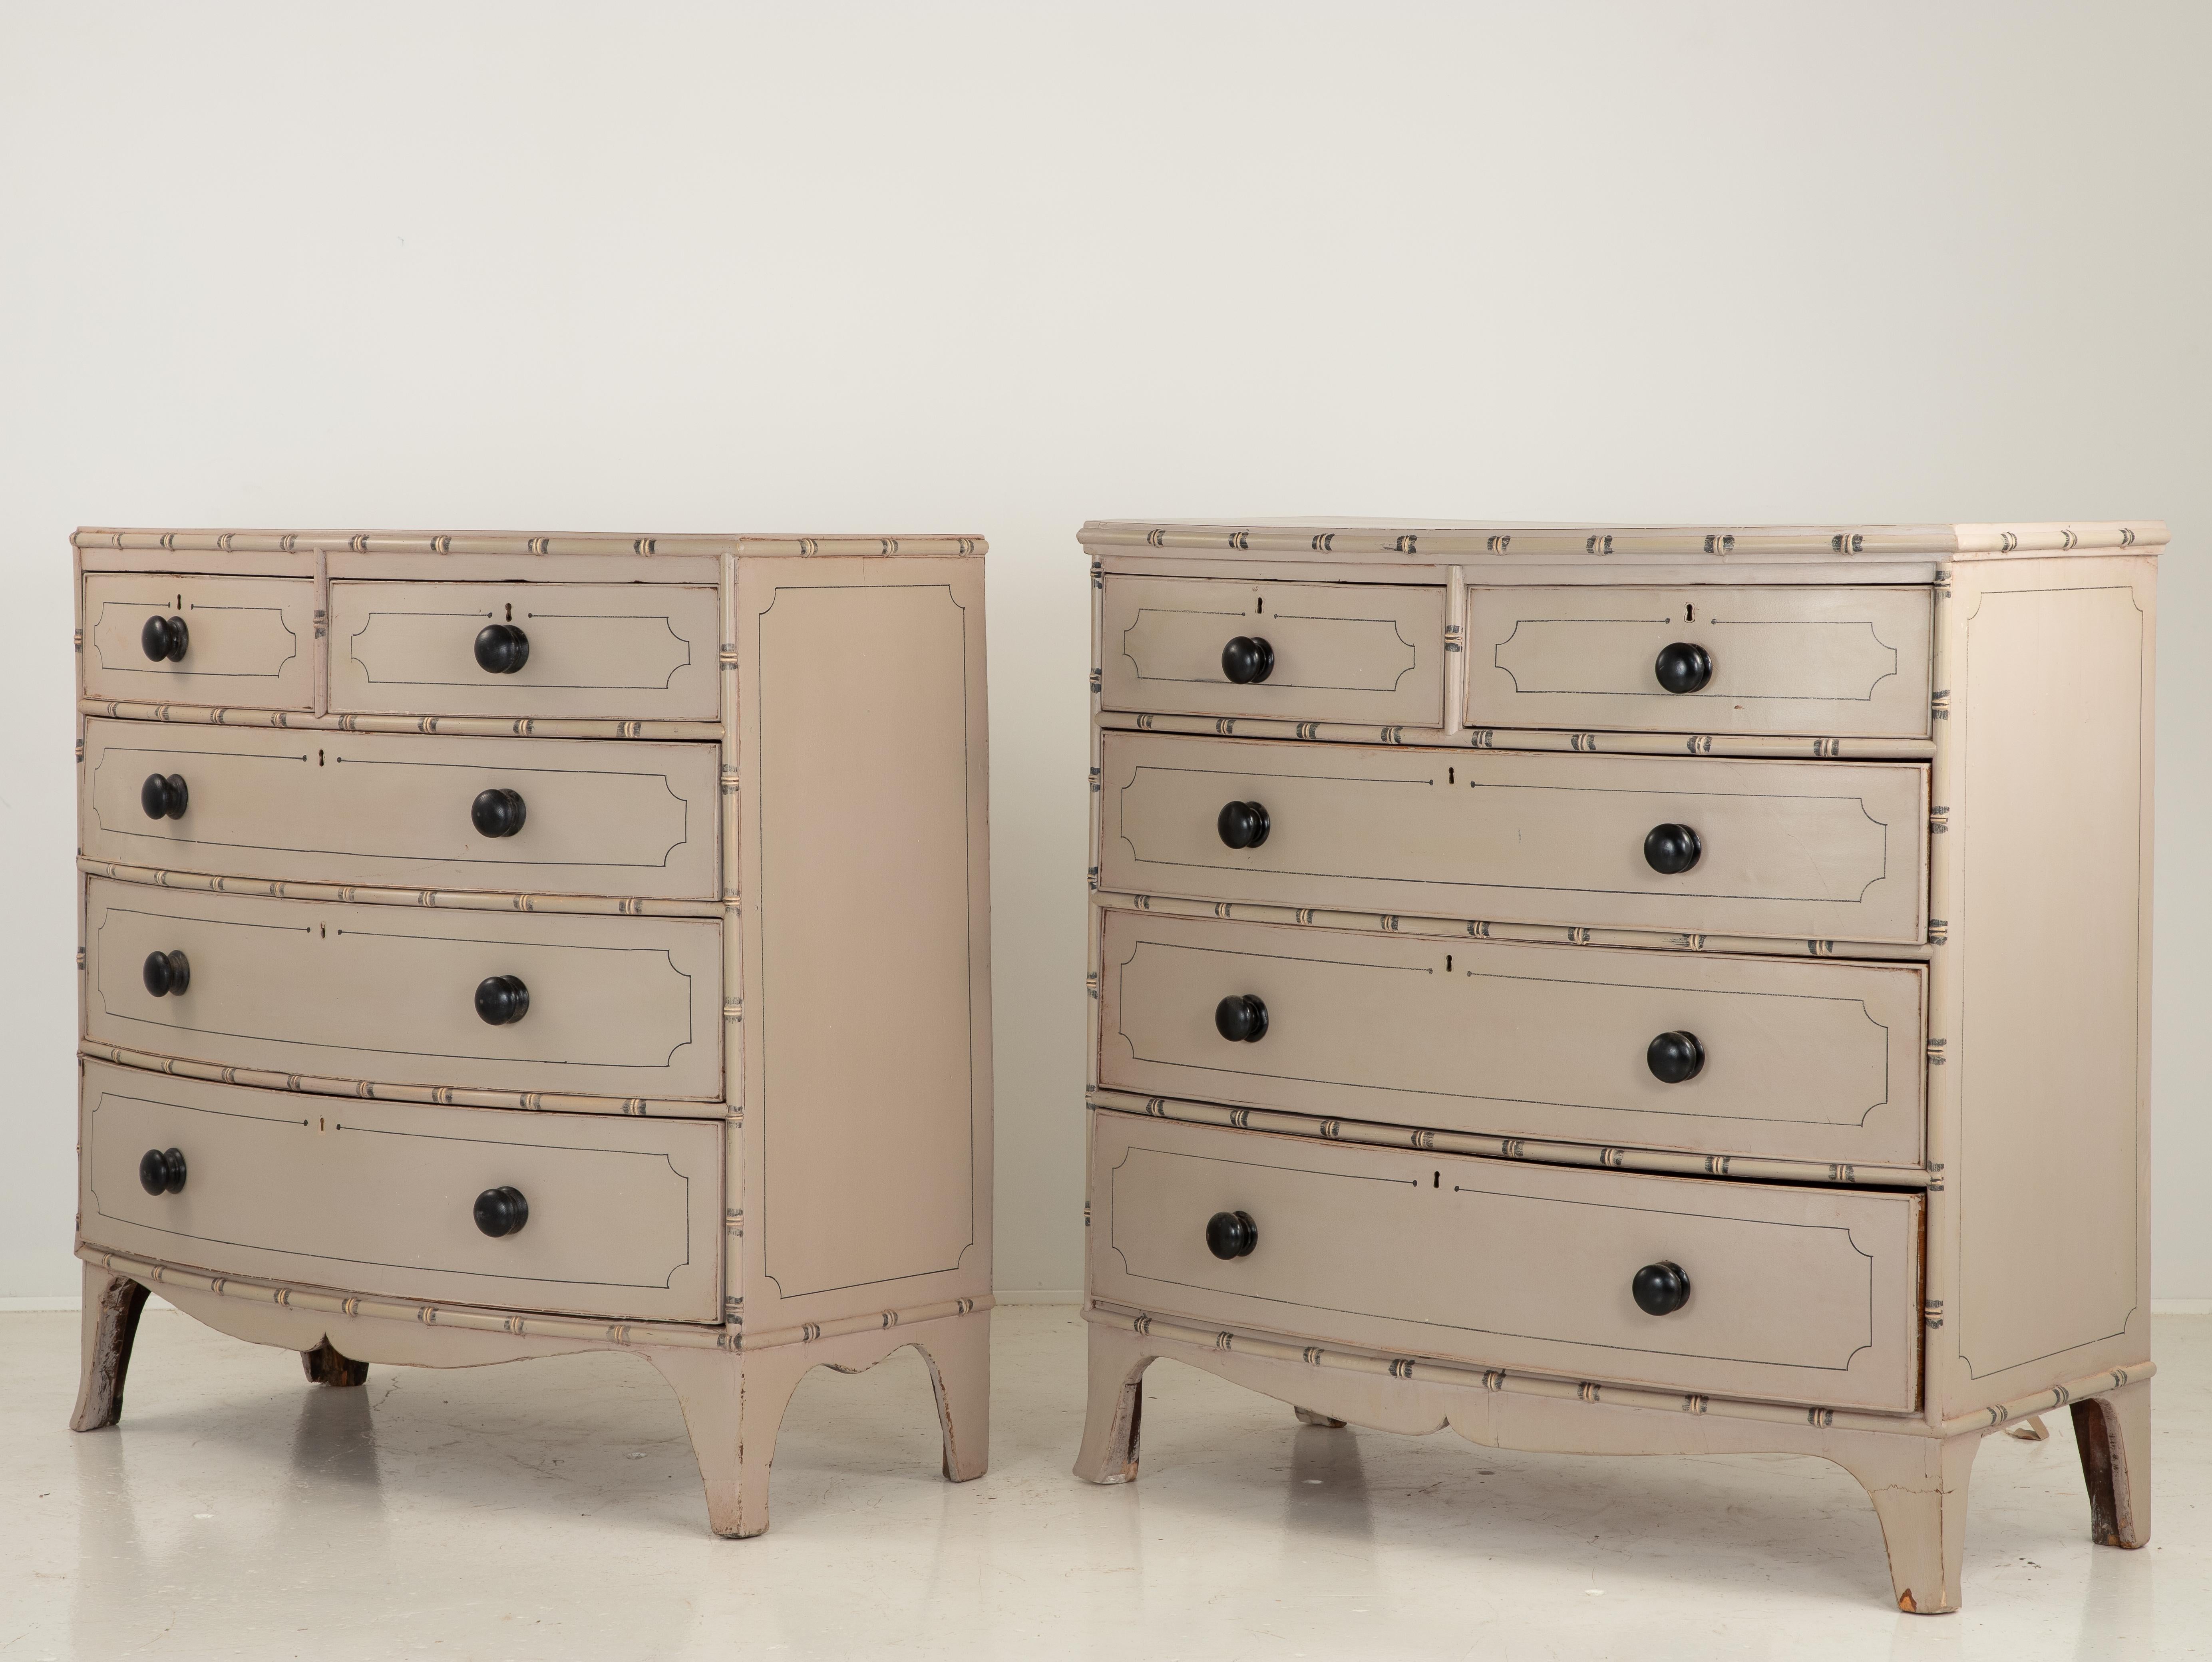 A pair of painted bowfront French chests of drawers in an updated chinoiserie style with splay legs. Two drawers of three drawers for a generous scale. Bamboo detail and recent paint with a pinstripe paint have been added. These are a matched pair